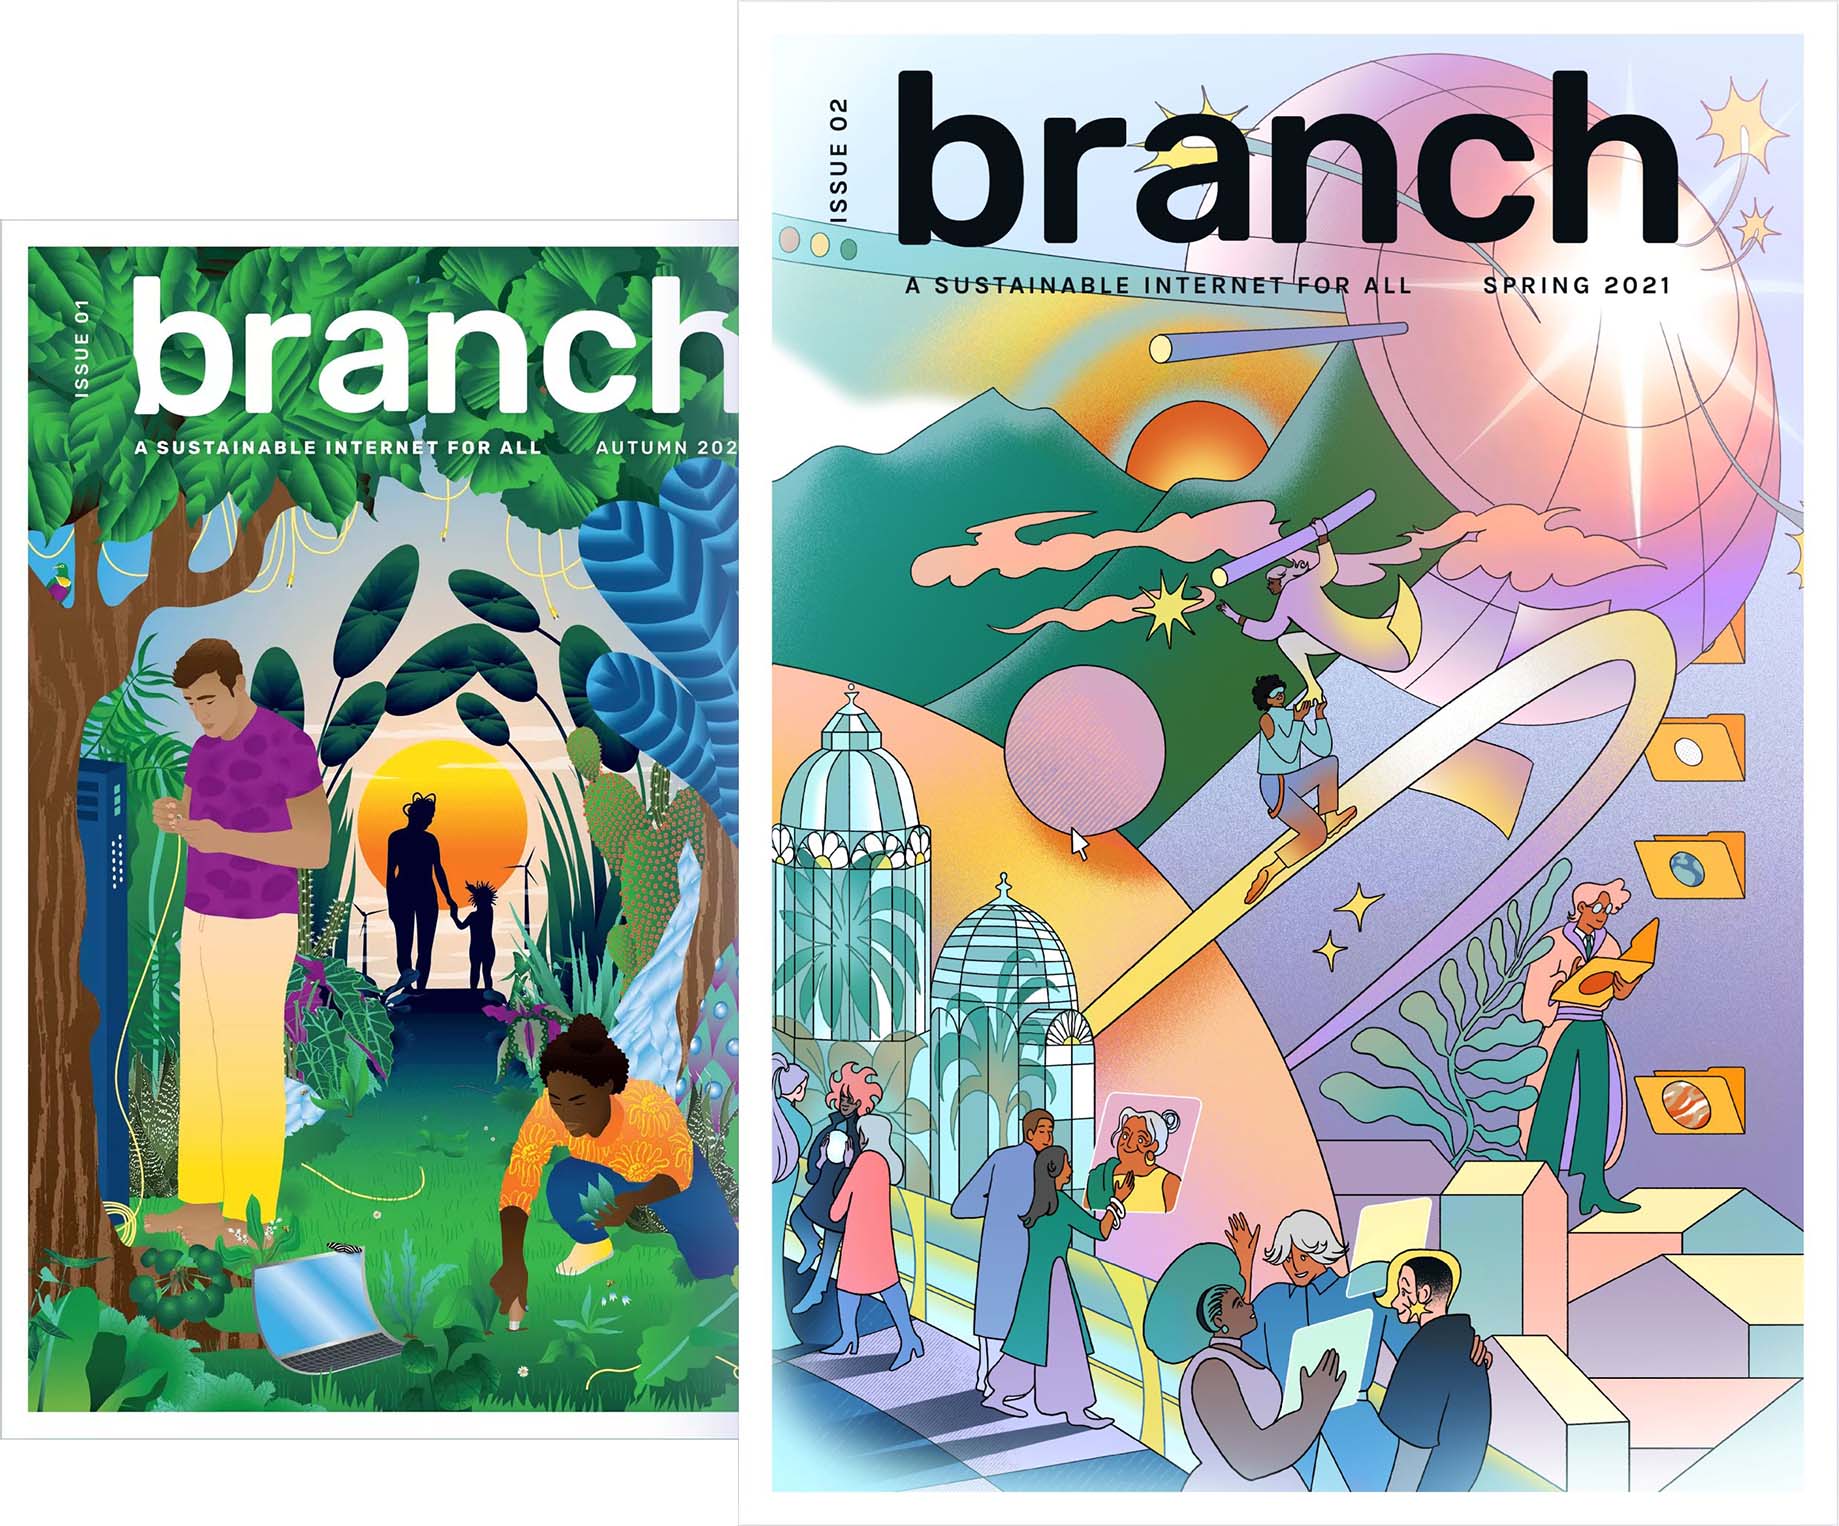 Covers of the online magazine